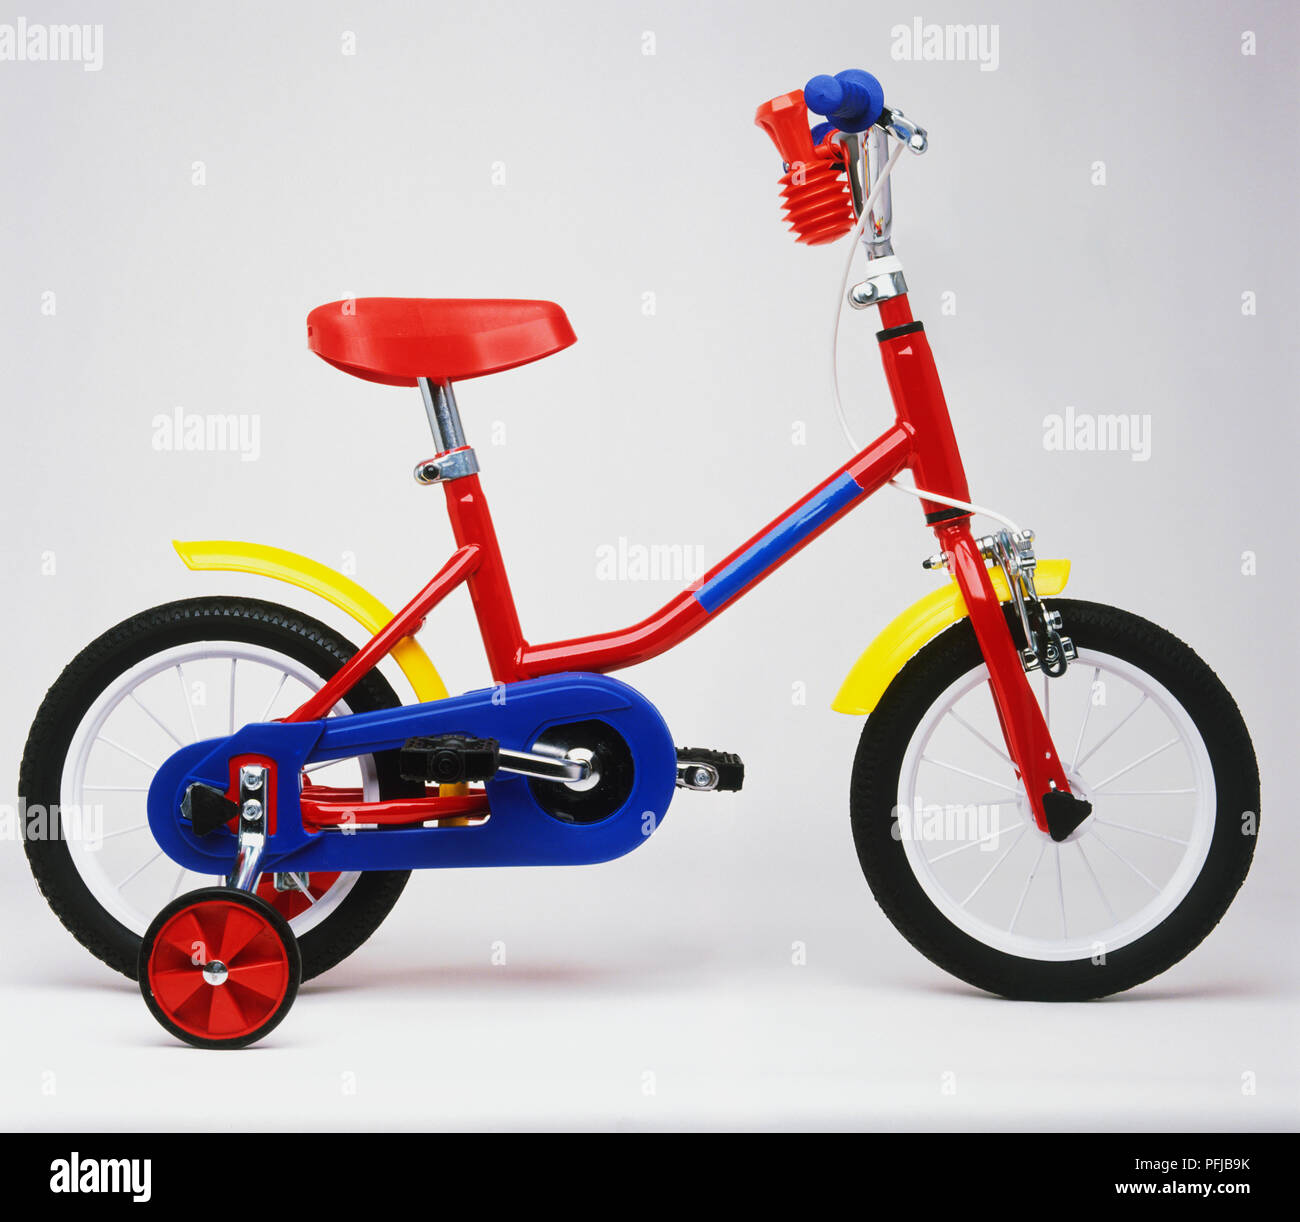 Child's colourful bicycle with stabilisers, side view Stock Photo